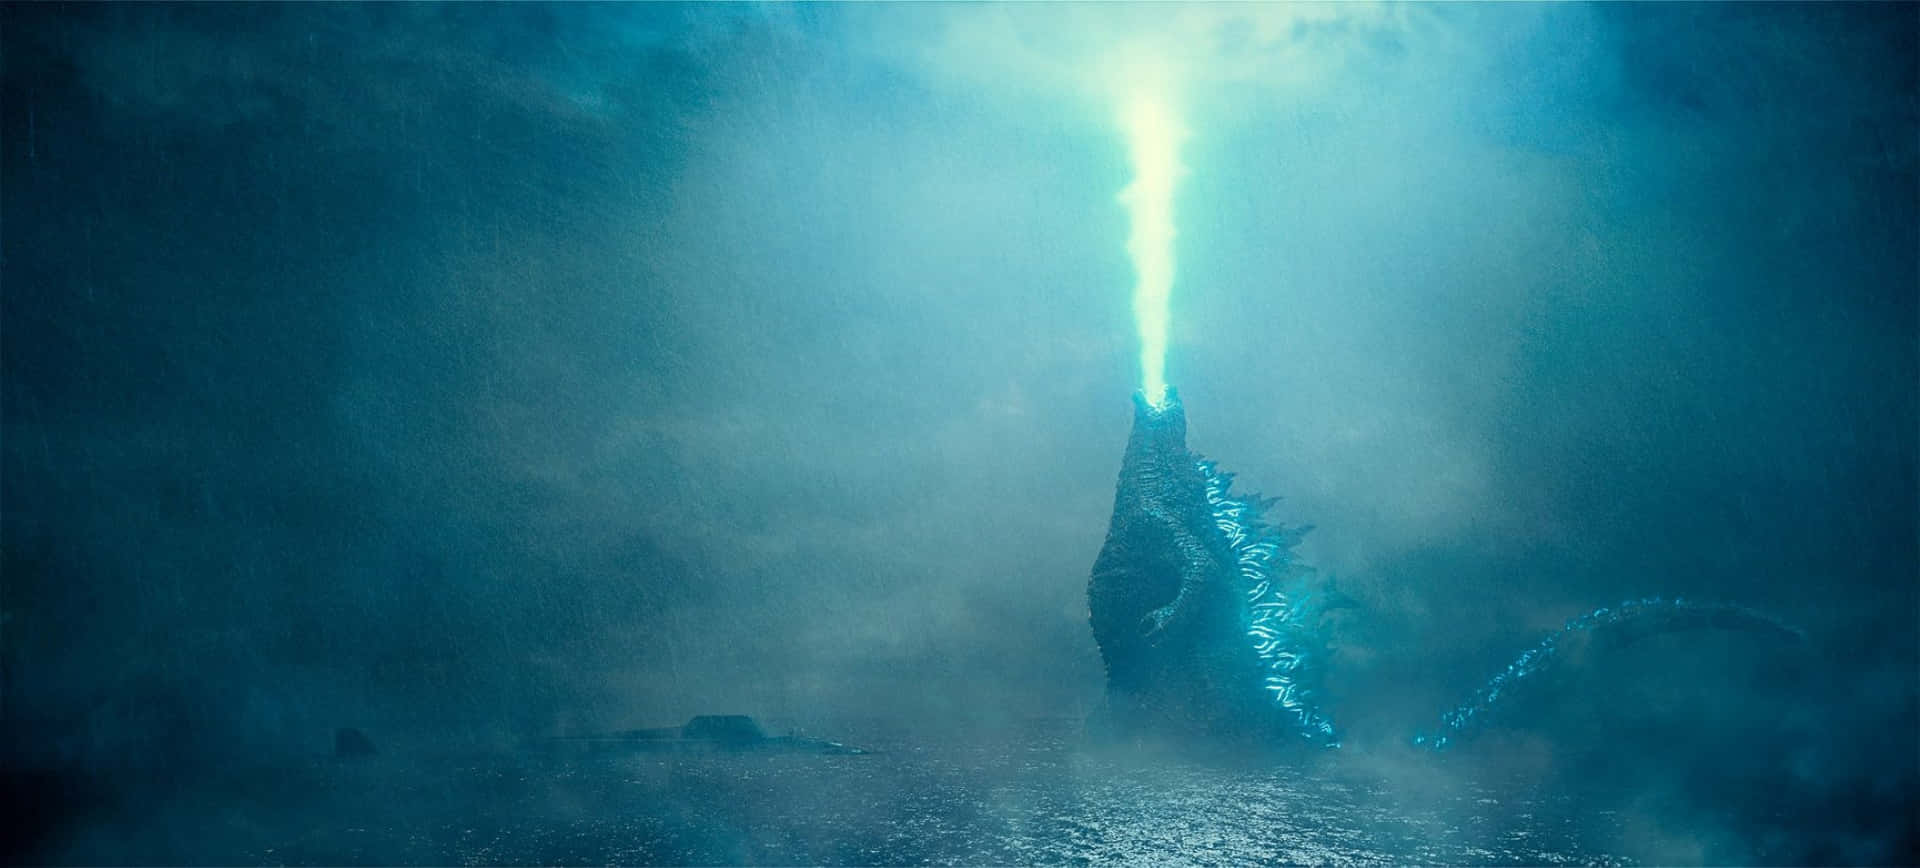 Godzilla unleashes his iconic Atomic Breath in an awe-inspiring display of power Wallpaper